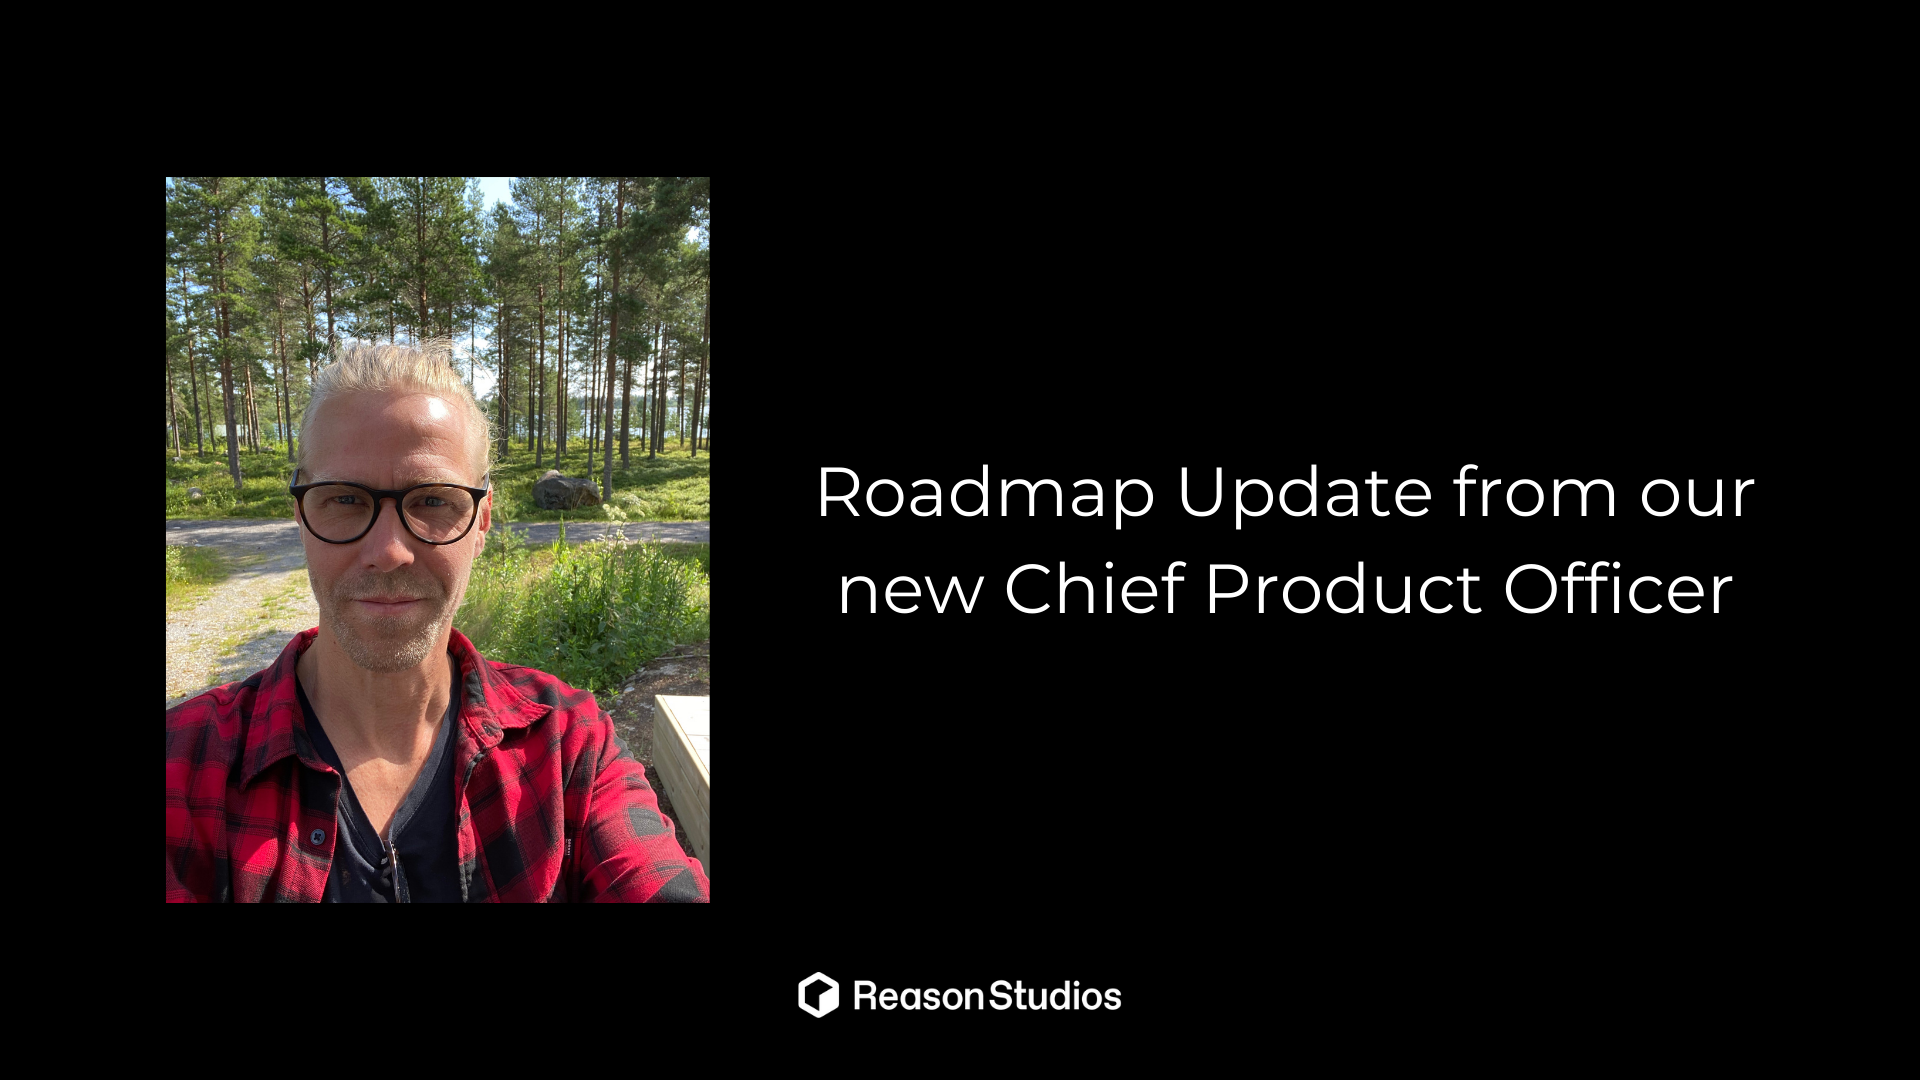 Roadmap Update from our new Chief Product Officer